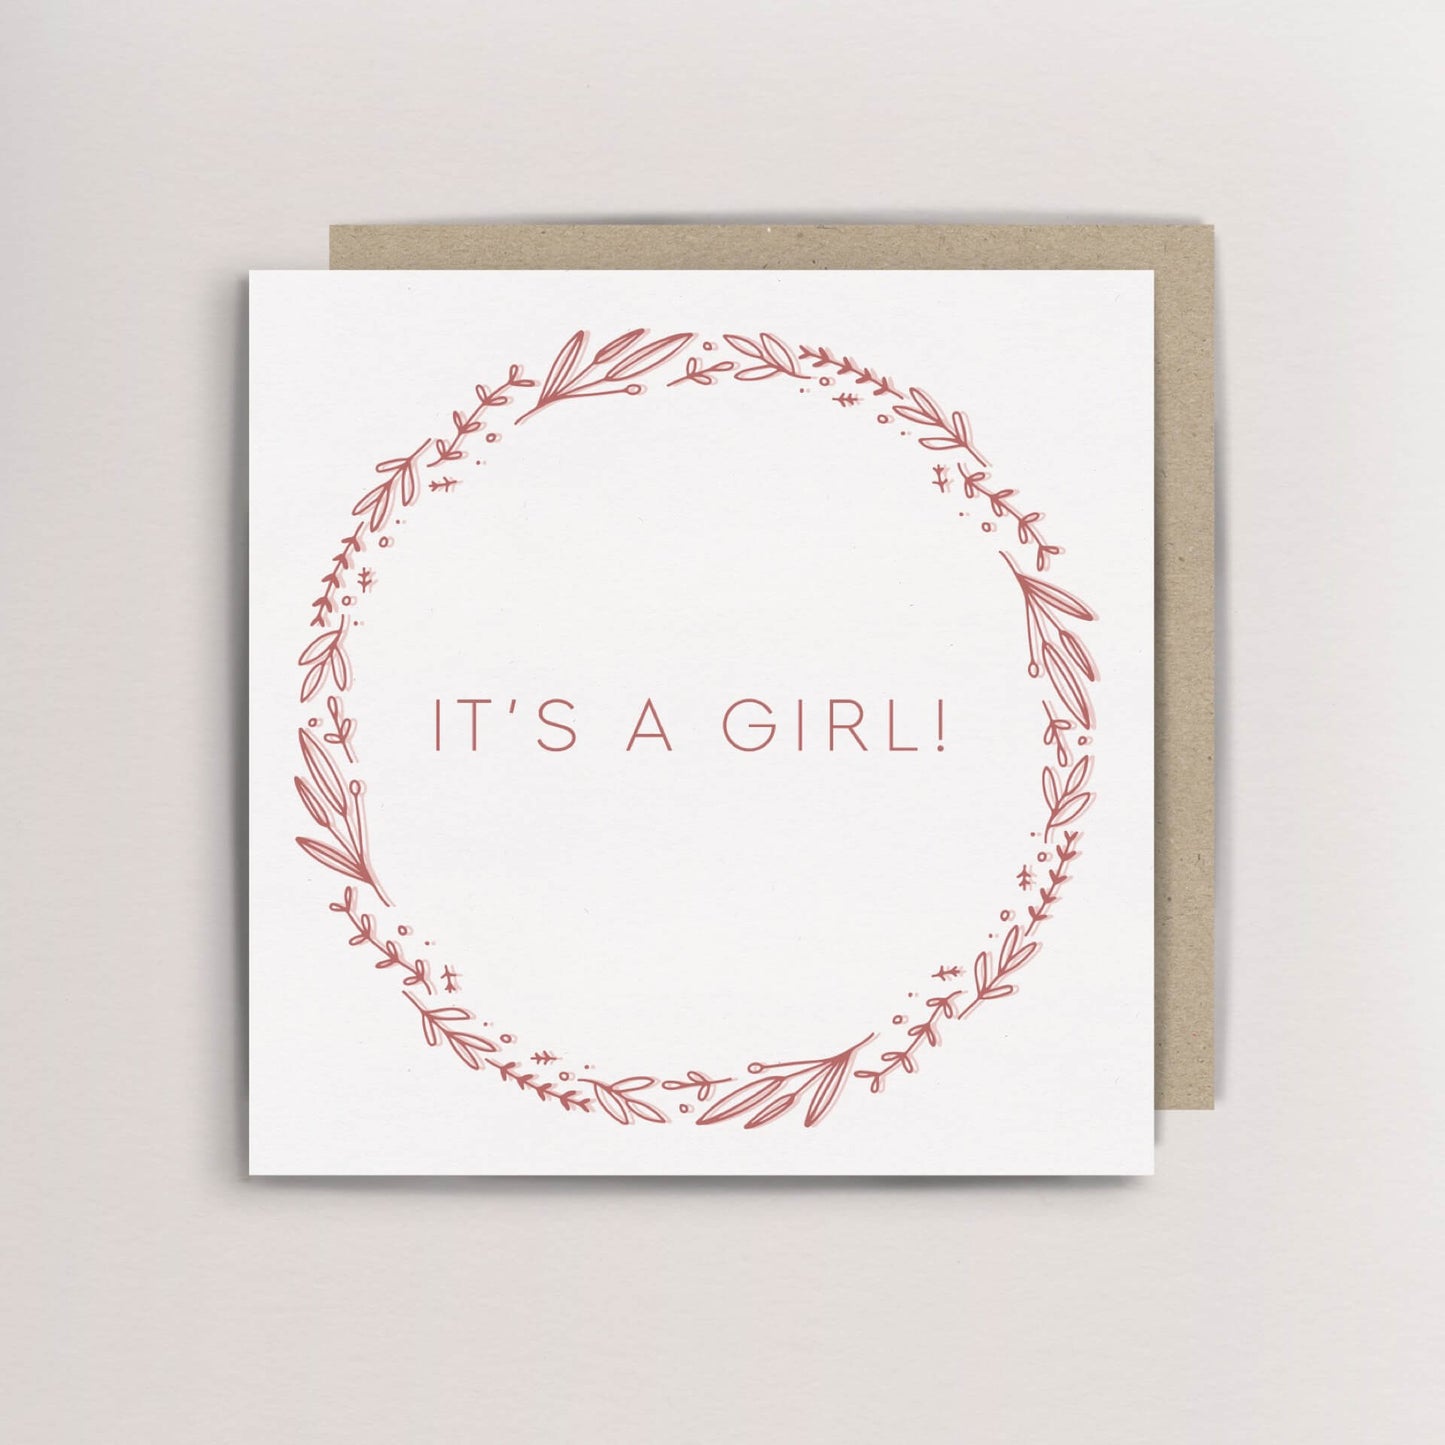 It's a girl new baby card